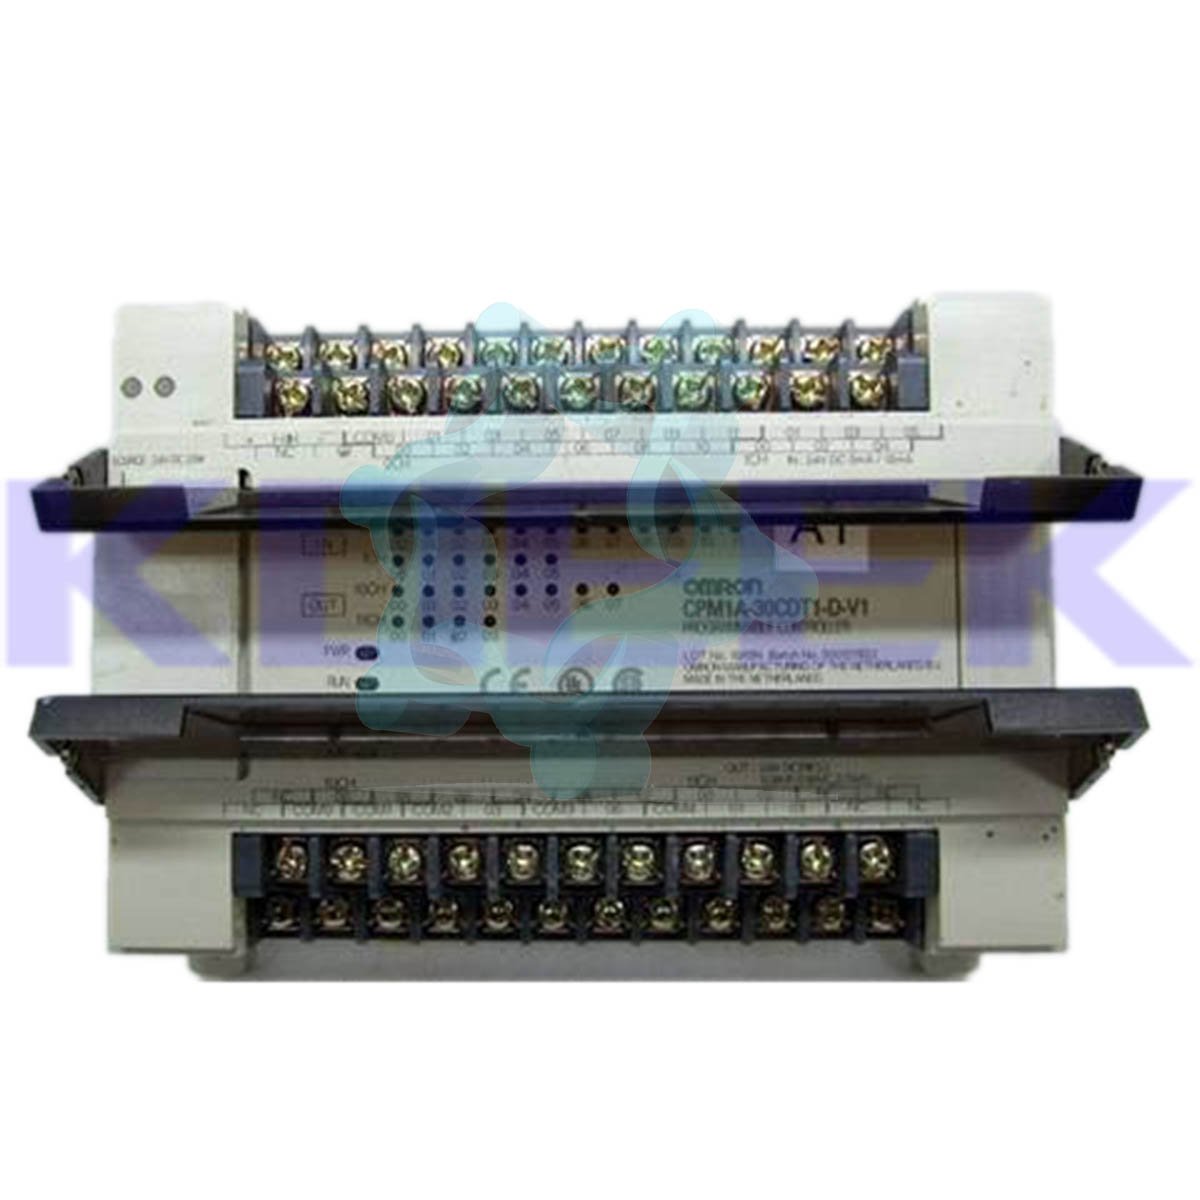 CPM1A-30CDT1-D-V1 KOEED 201-500, 80%, import_2020_10_10_031751, Omron, Other